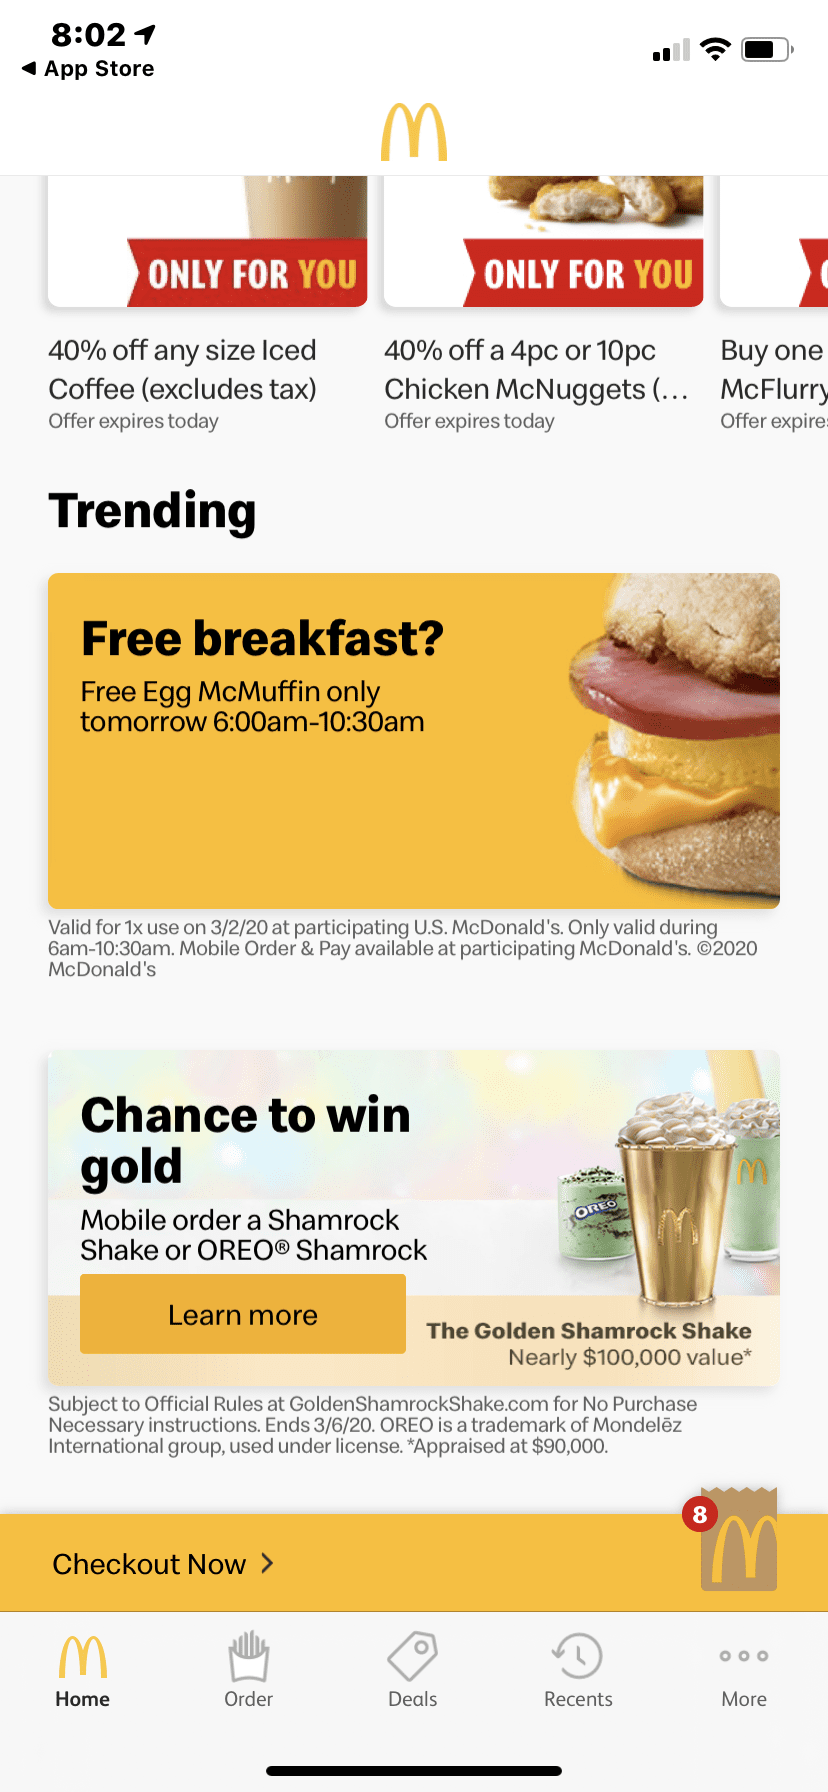 Today Is Free Egg McMuffin Day at McDonald s